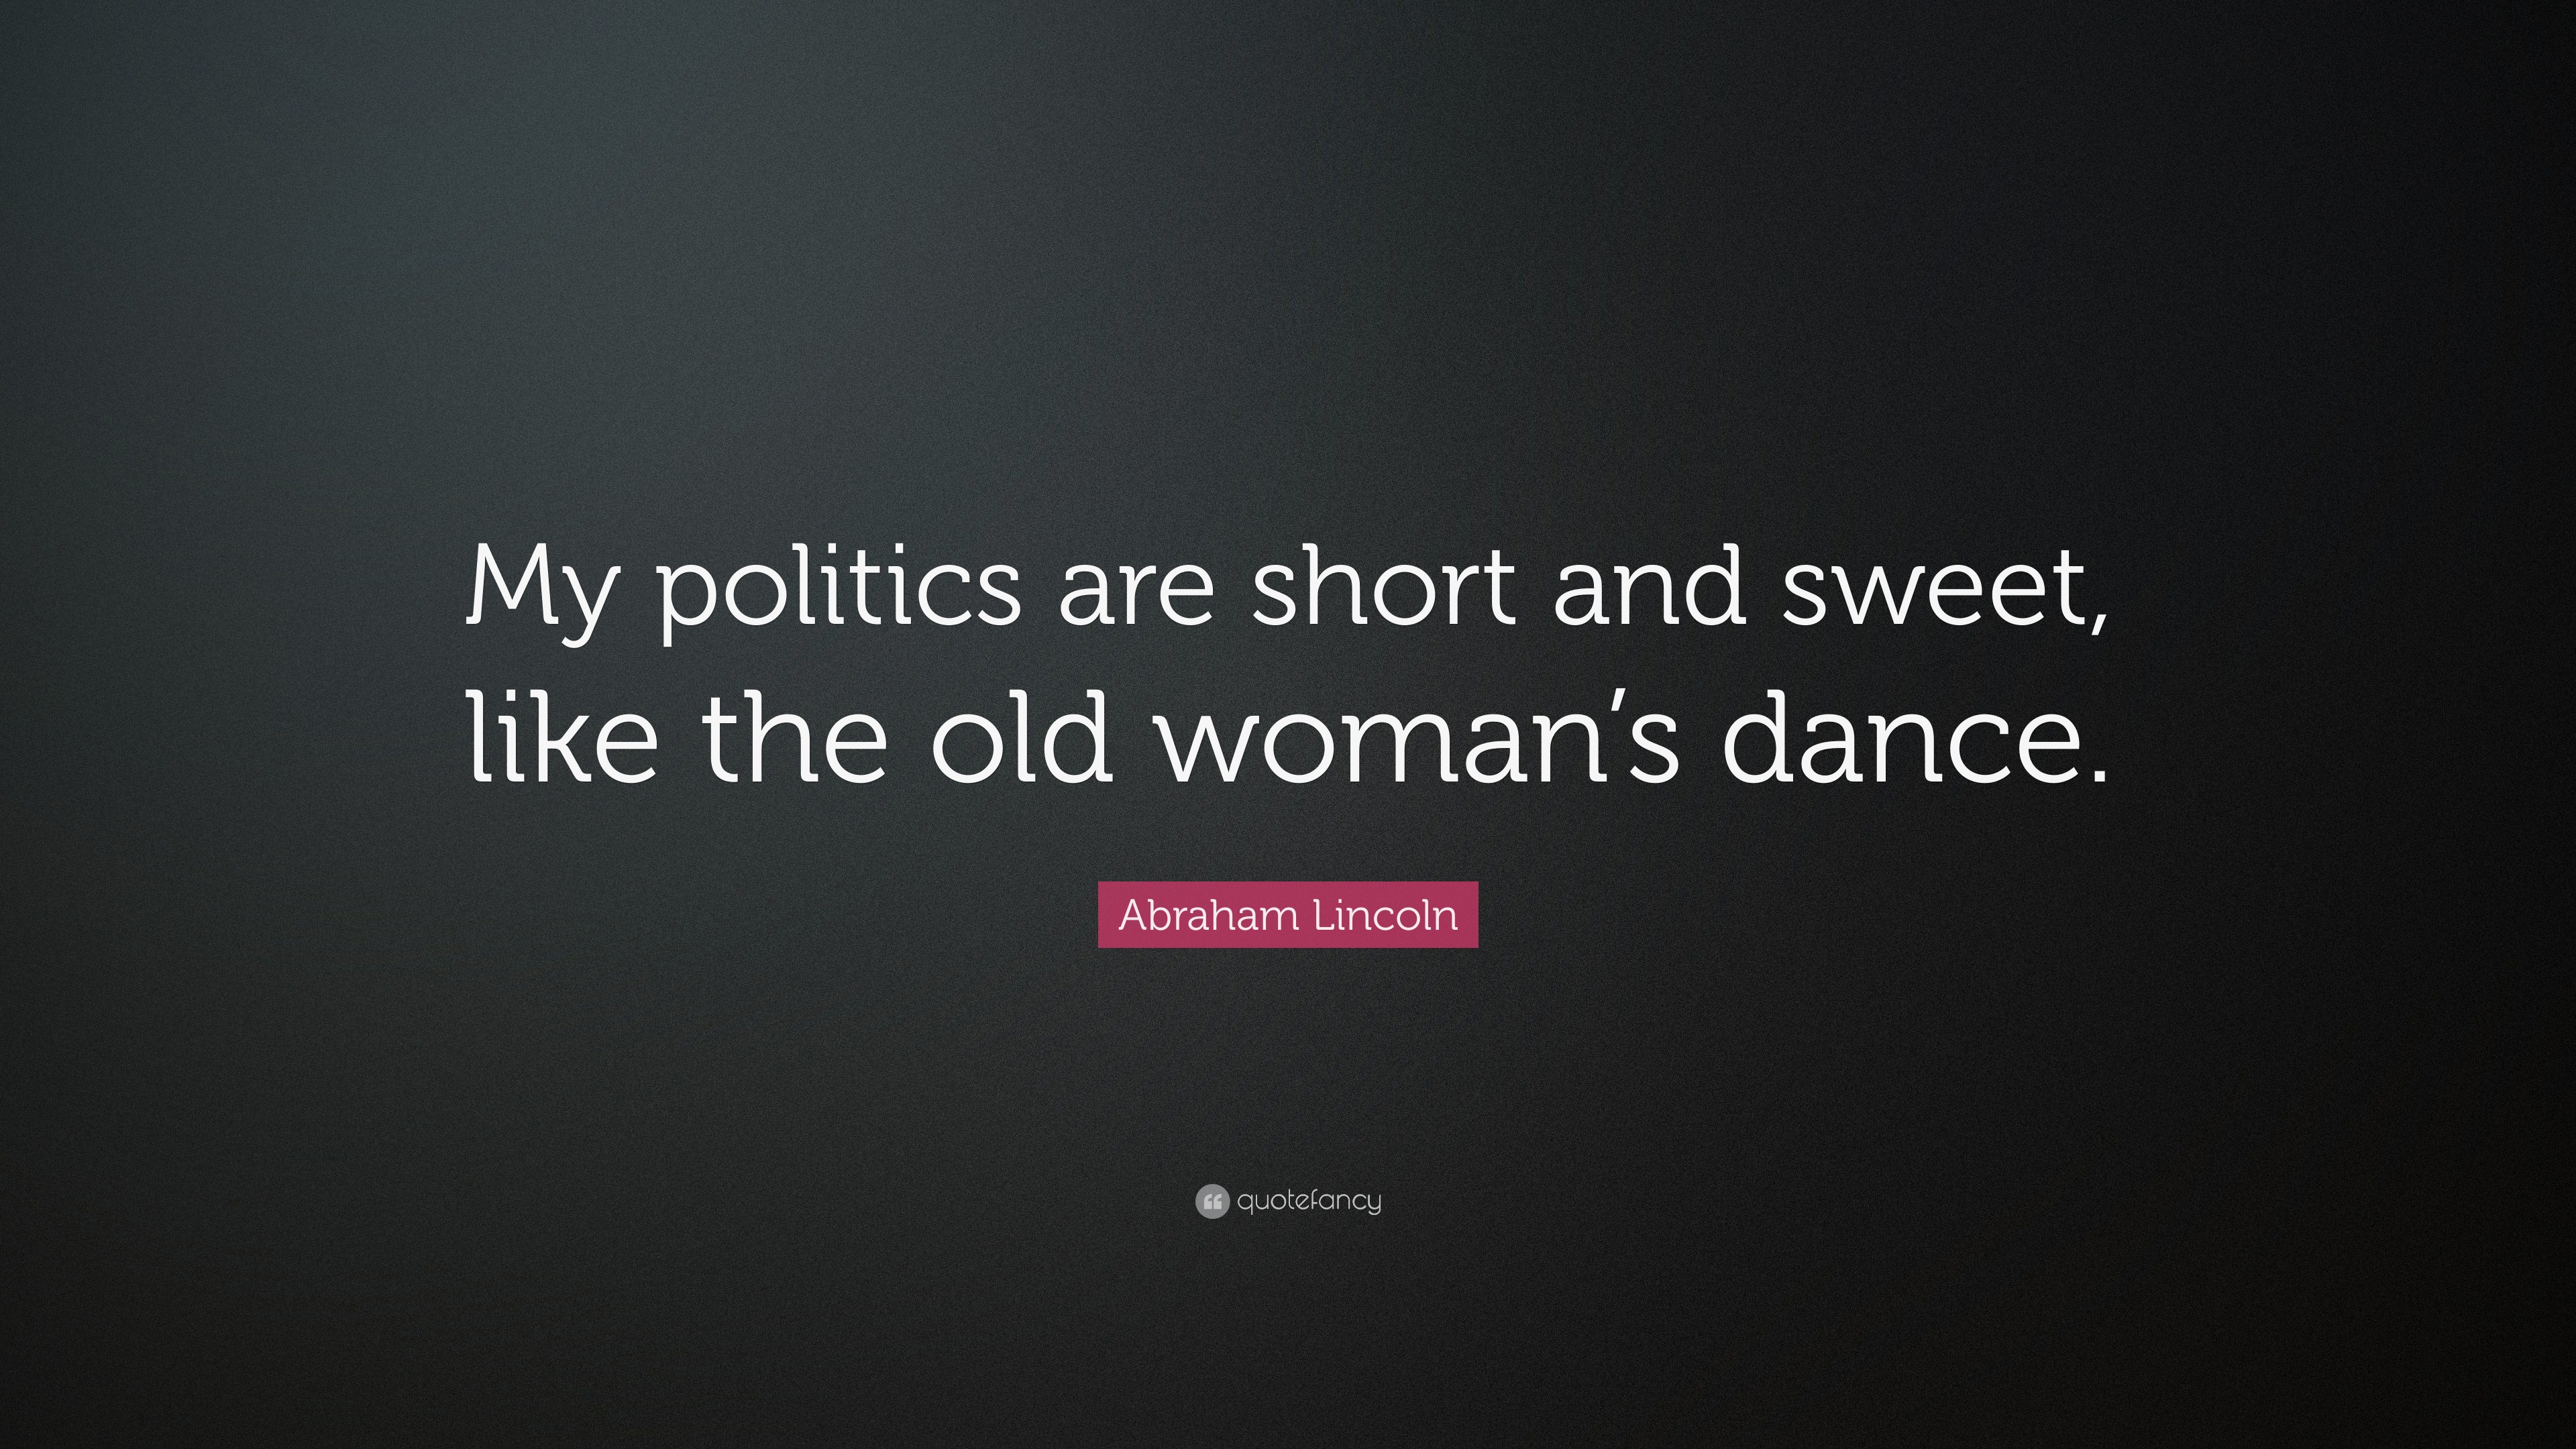 12 Quotes From Women Politicians About Fashion and Politics